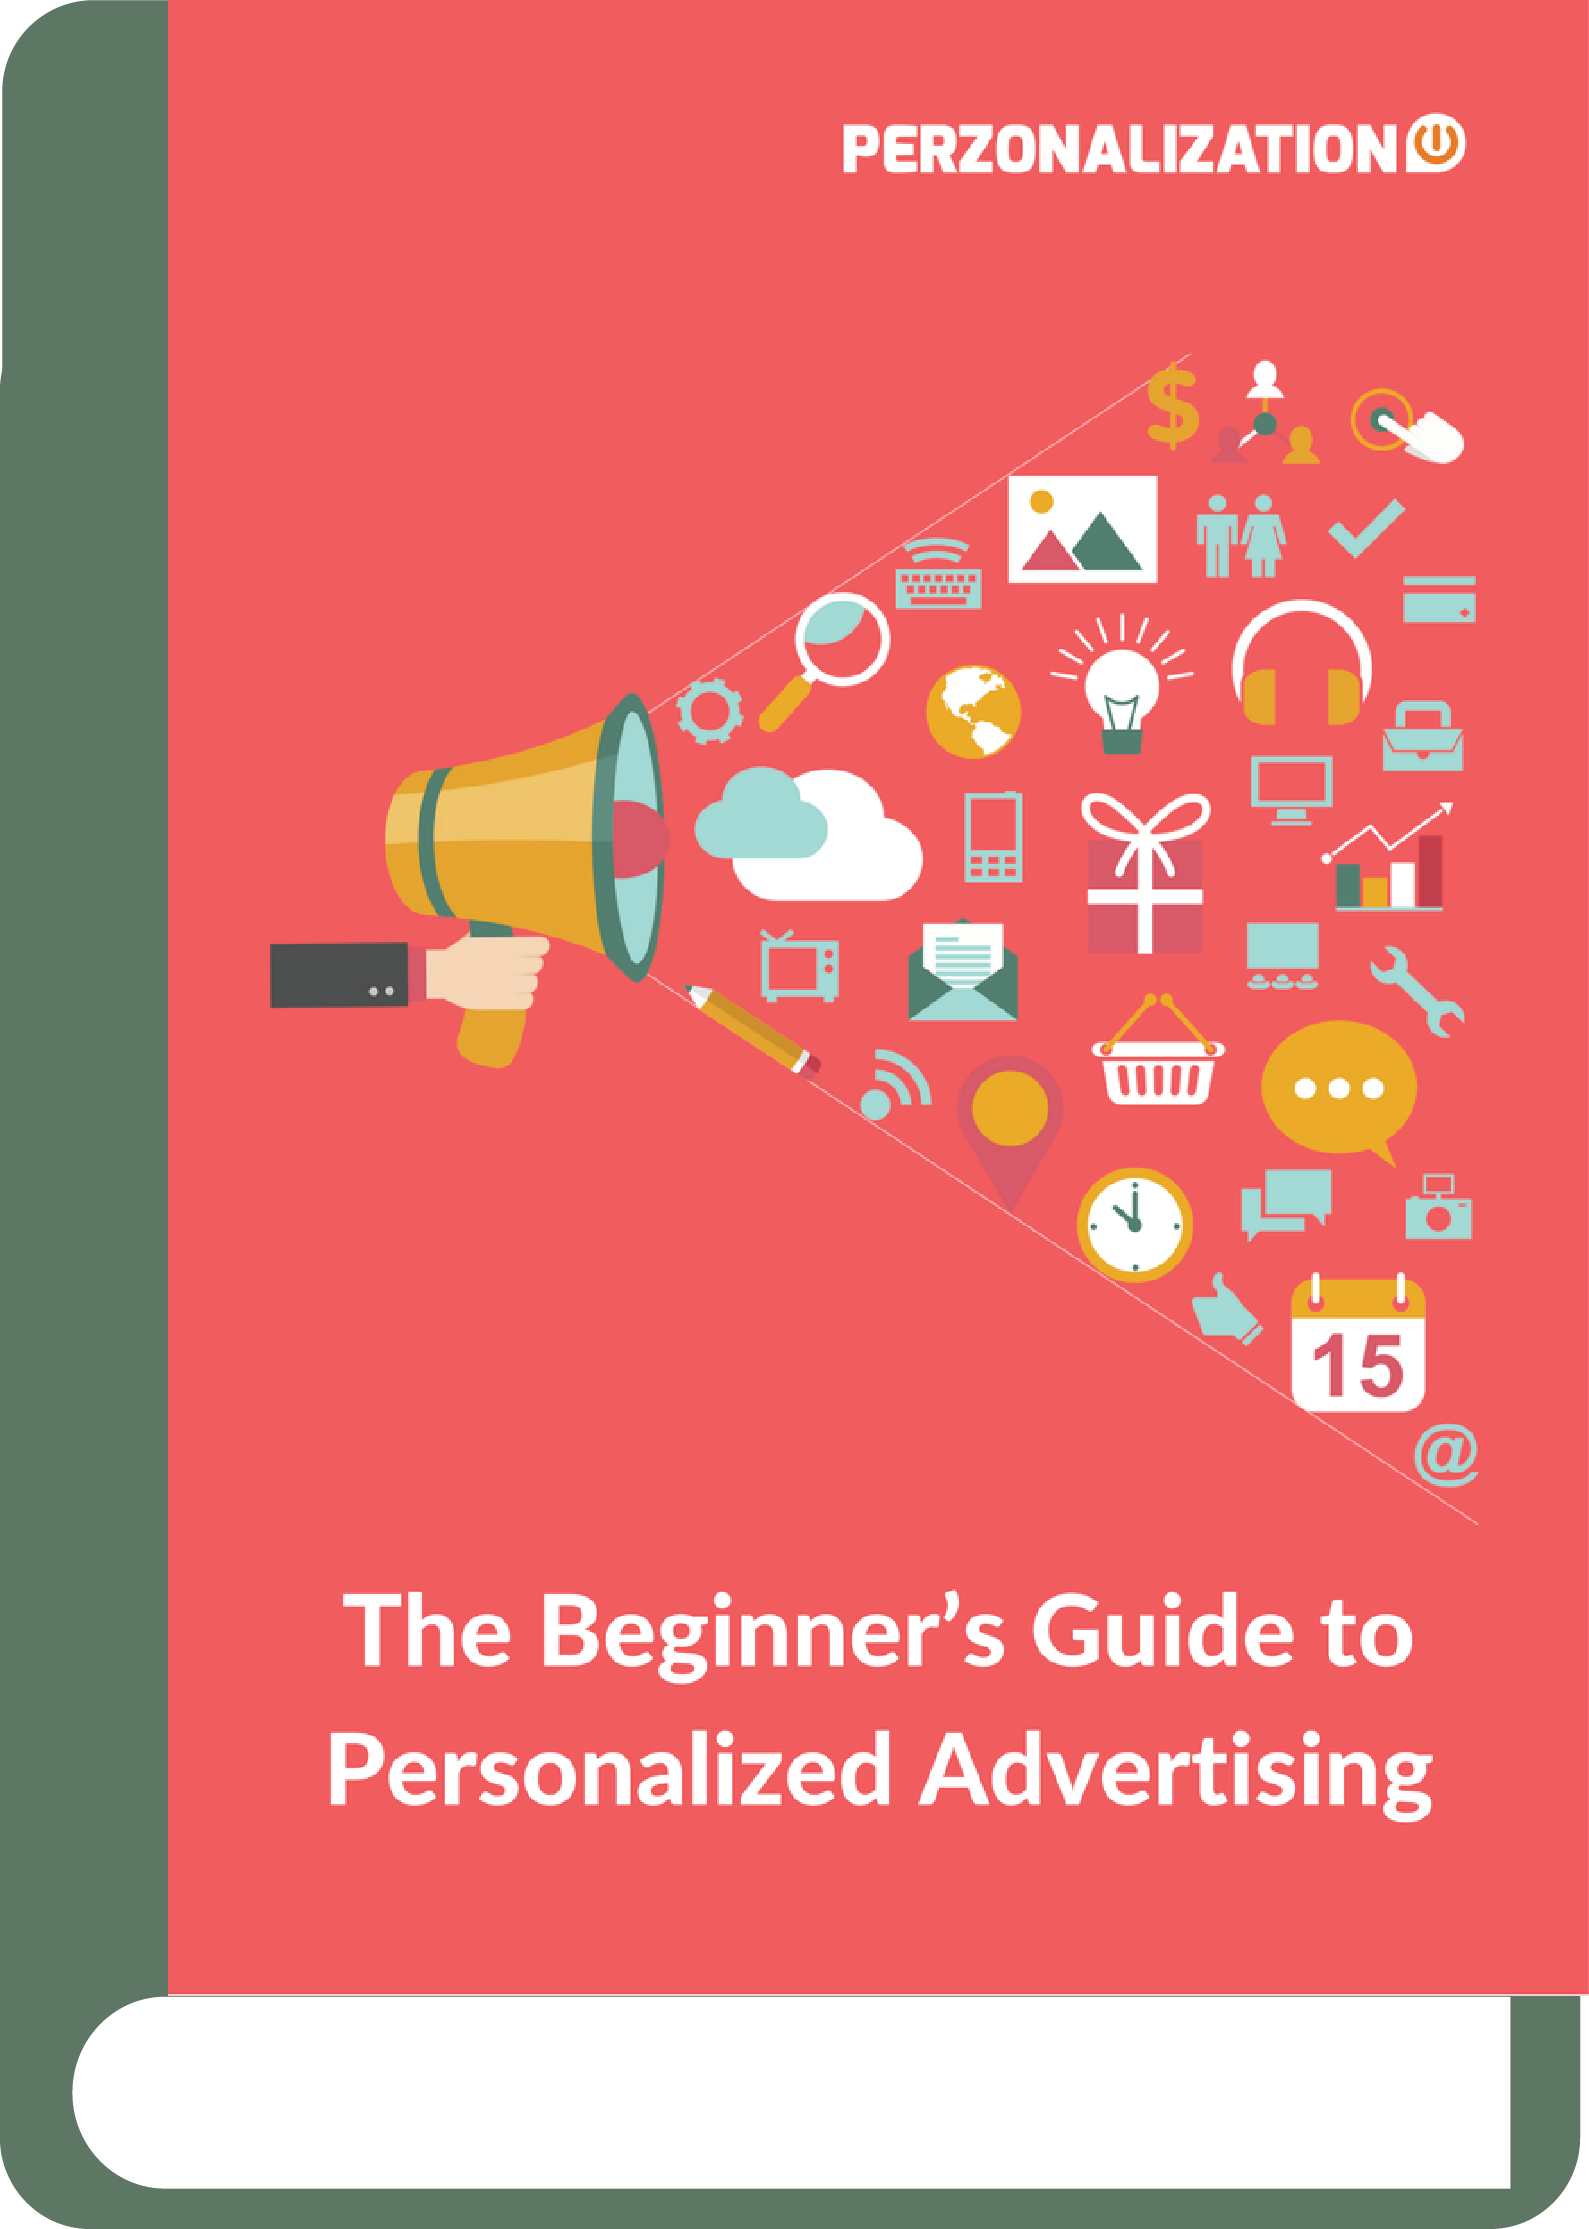 Personalized advertising helps your eCommerce customers because the ads are targeted. It helps you to get into their shoes and give them what they need. Find out more in this free eBook!